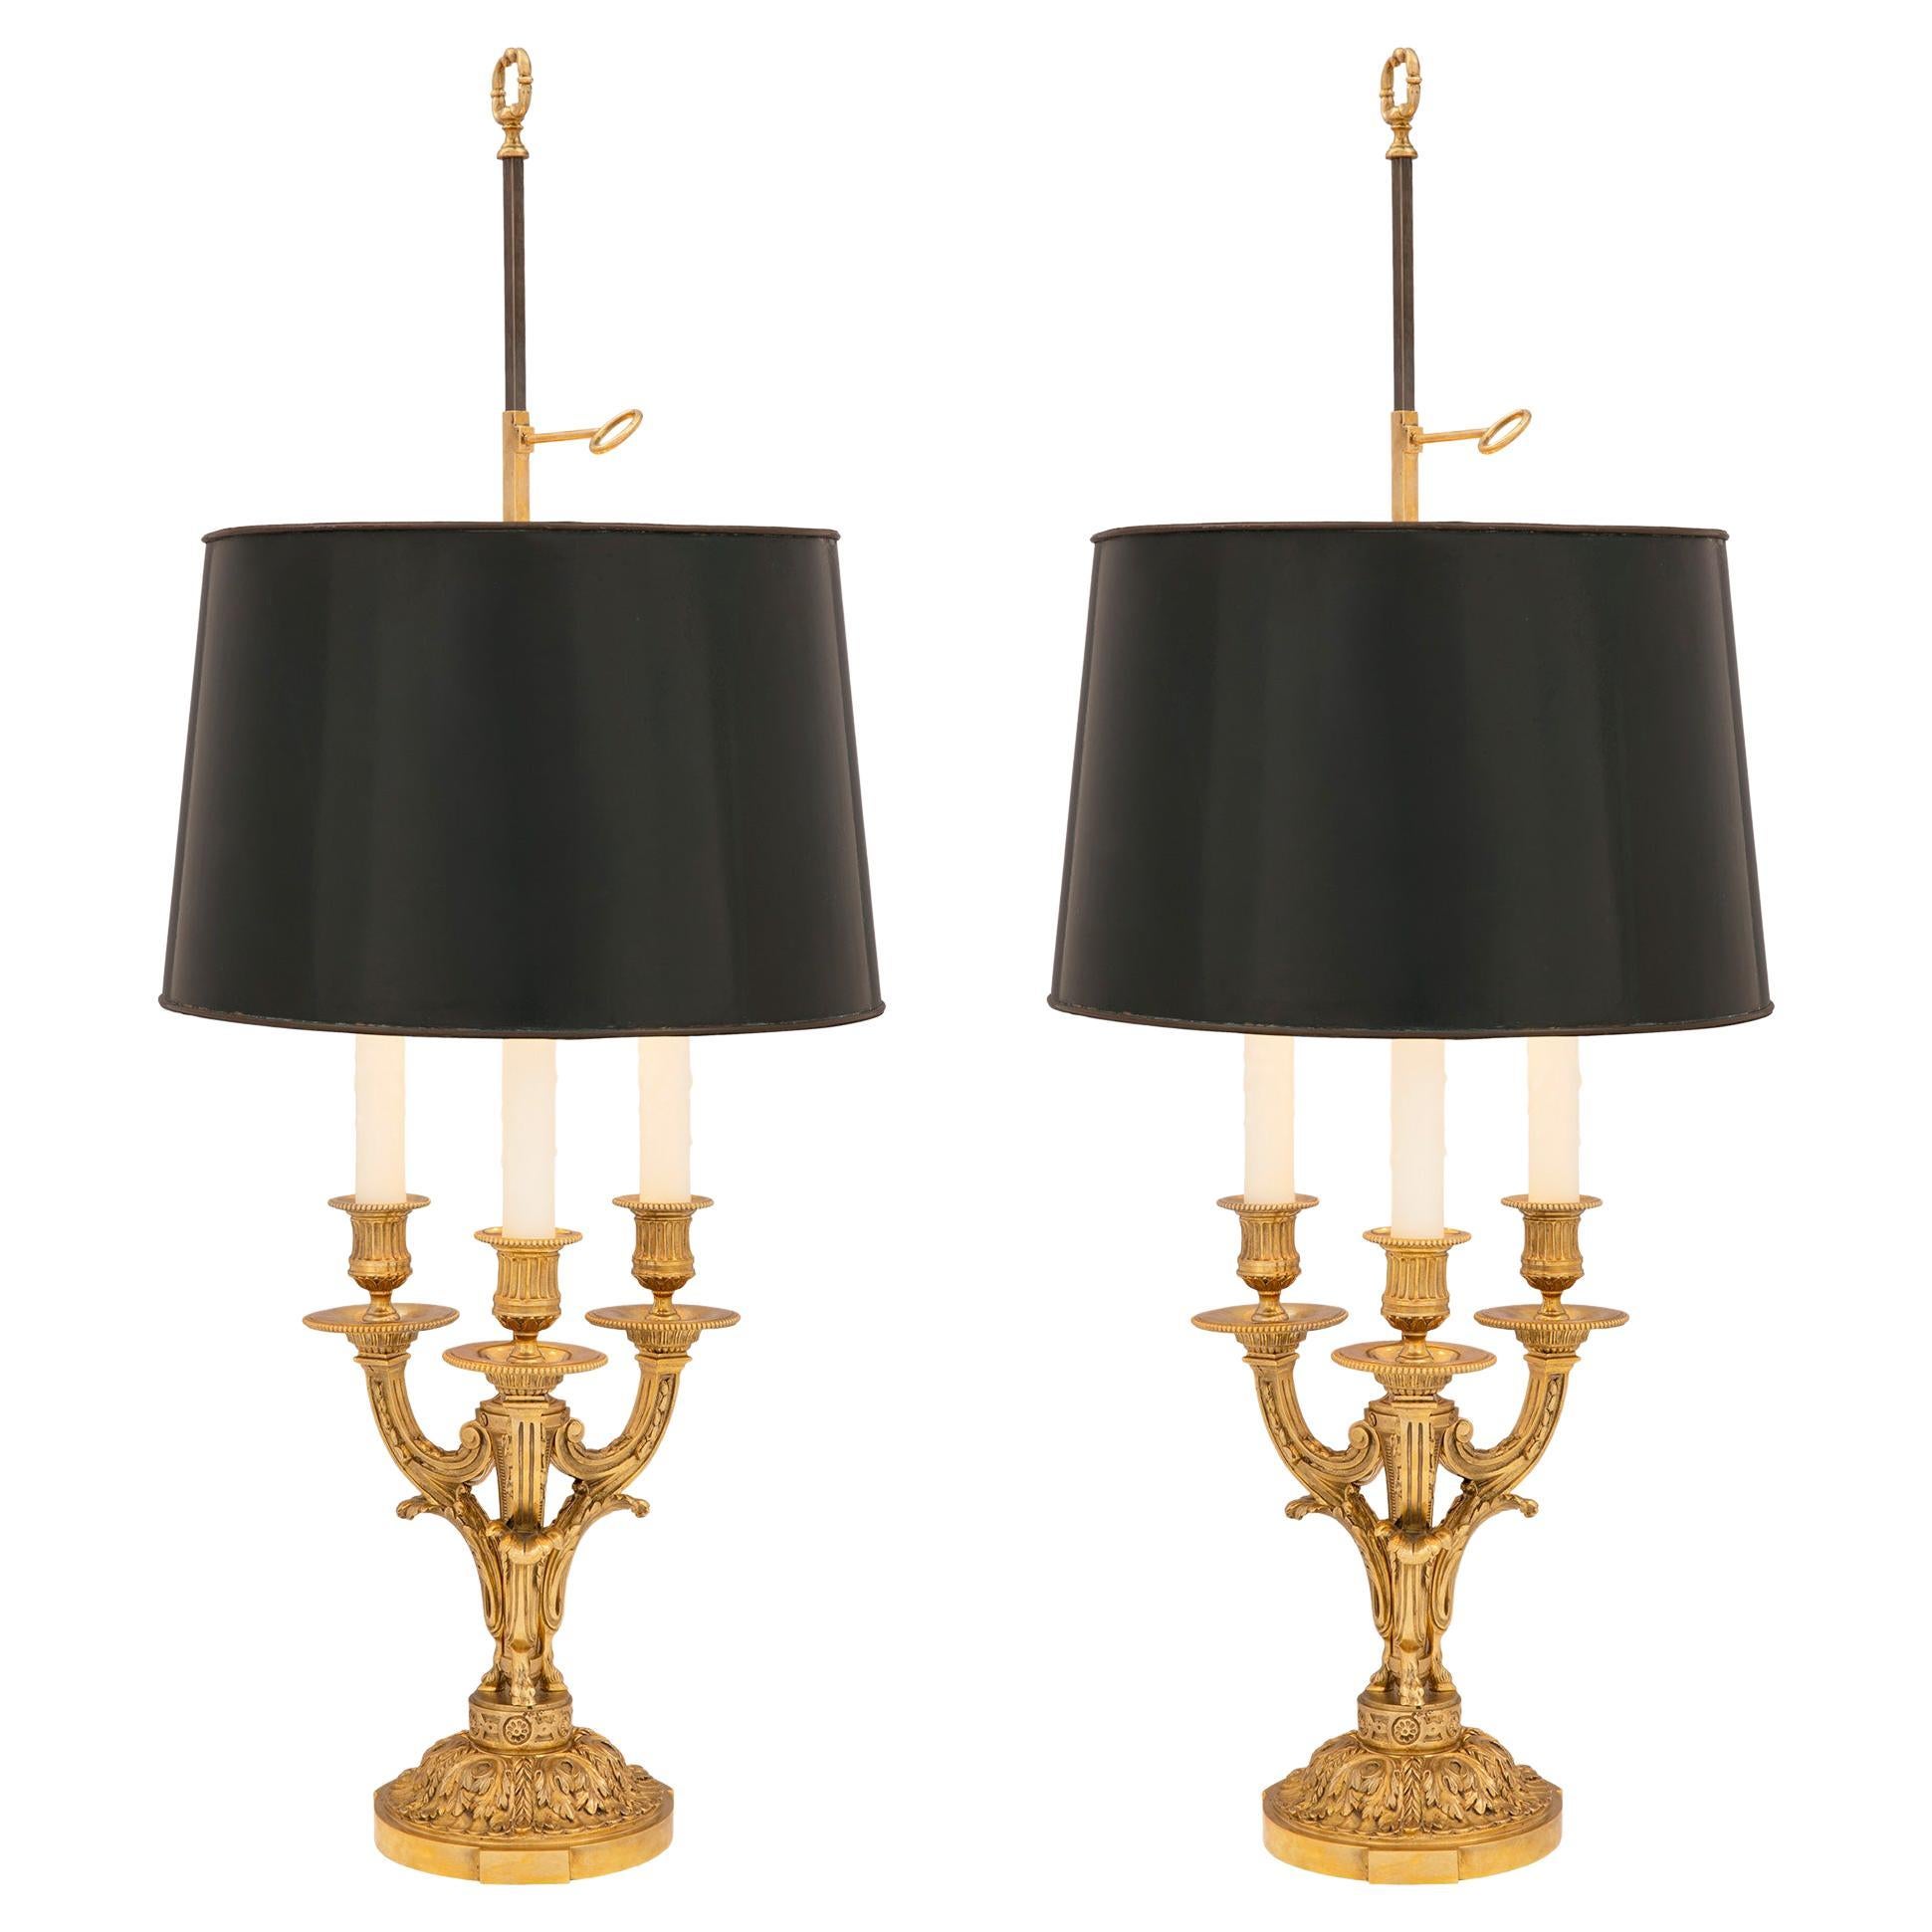 Pair of French Mid-19th Century Louis XVI Style Ormolu Bouilotte Lamps For Sale